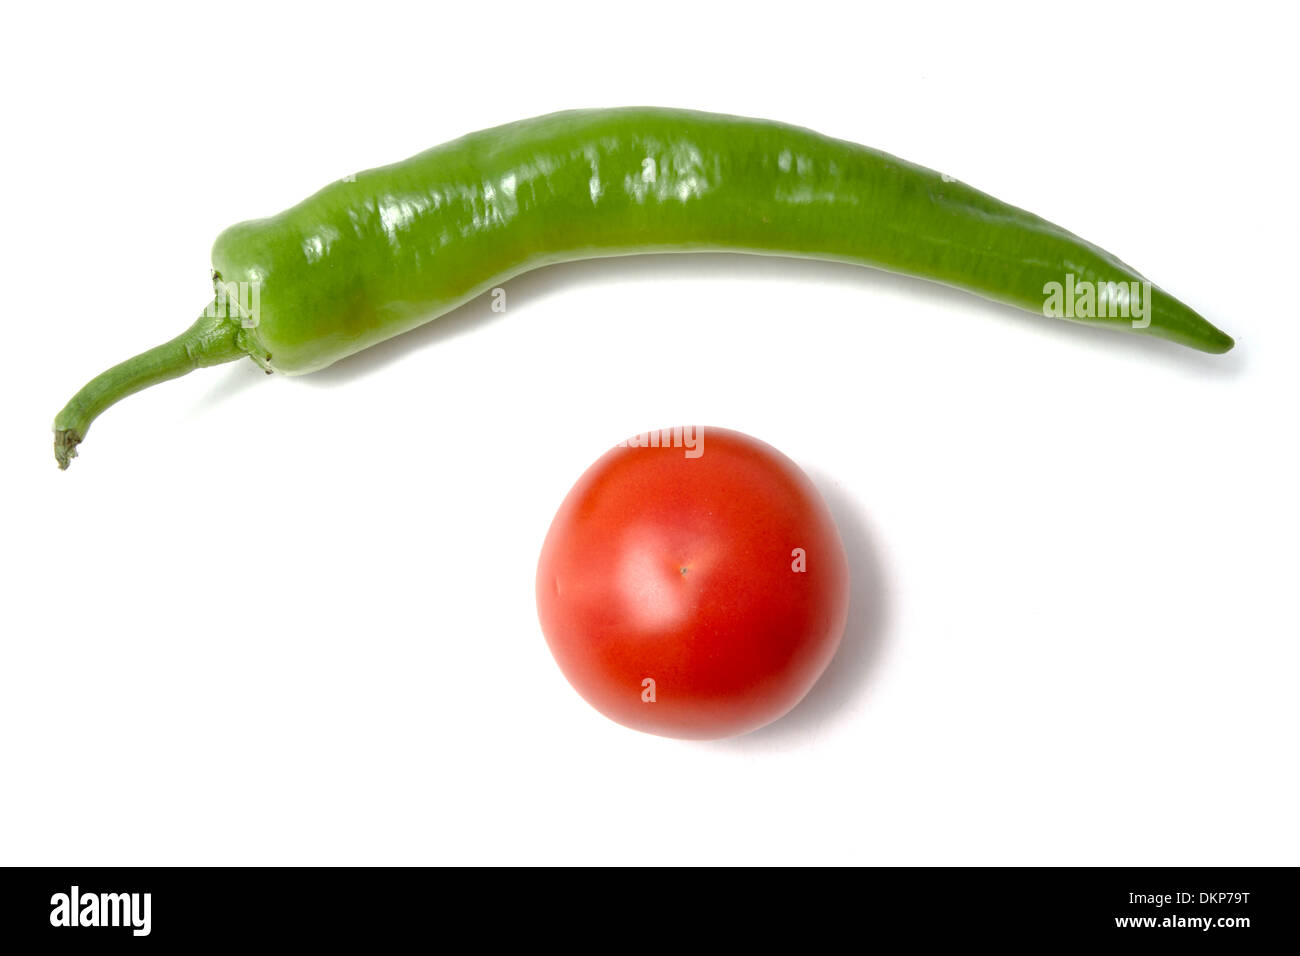 Red tomato and green pepper closeup on white background Stock Photo